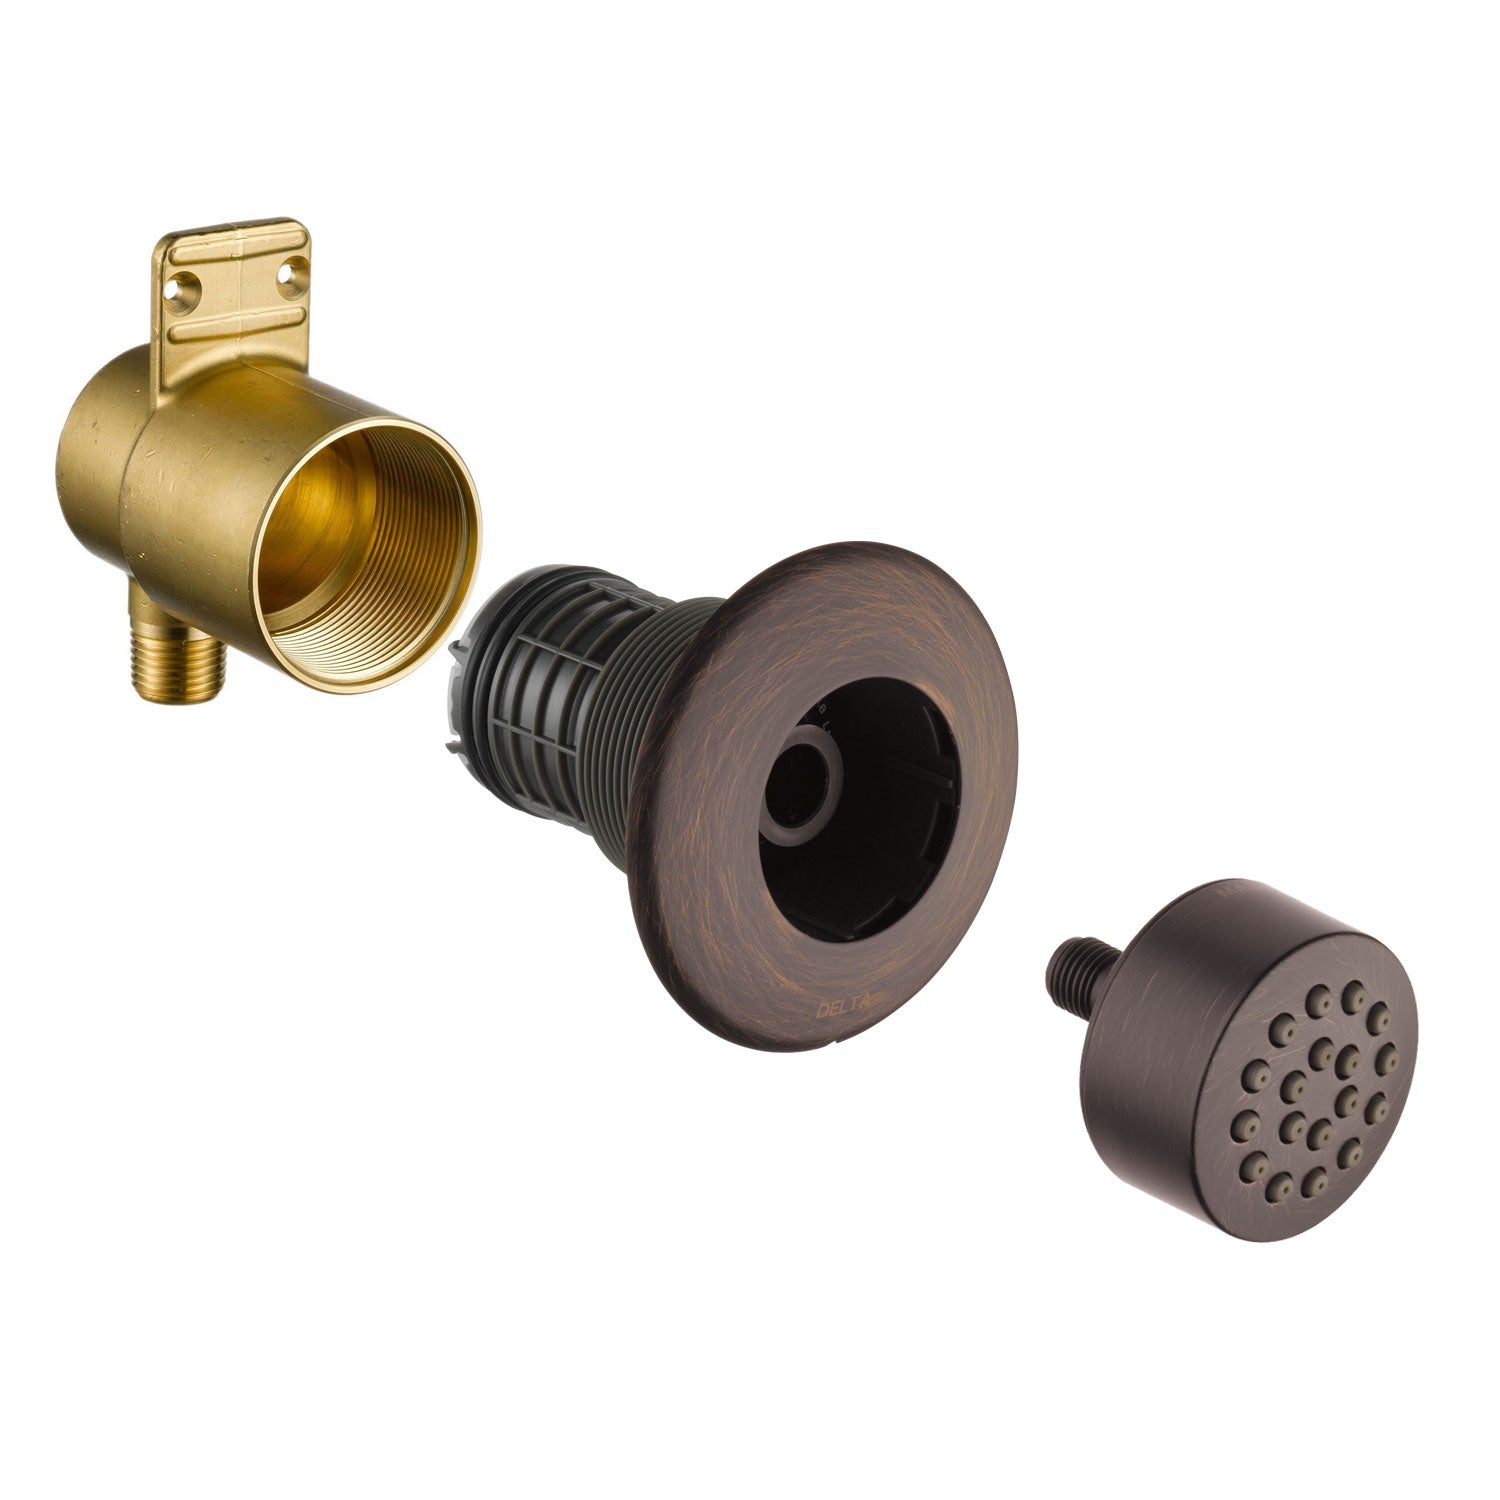 Delta Venetian Bronze Finish HydraChoice Touch Clean Round Shower System Body Spray COMPLETE Includes Valve, Trim, and Spray D1374V